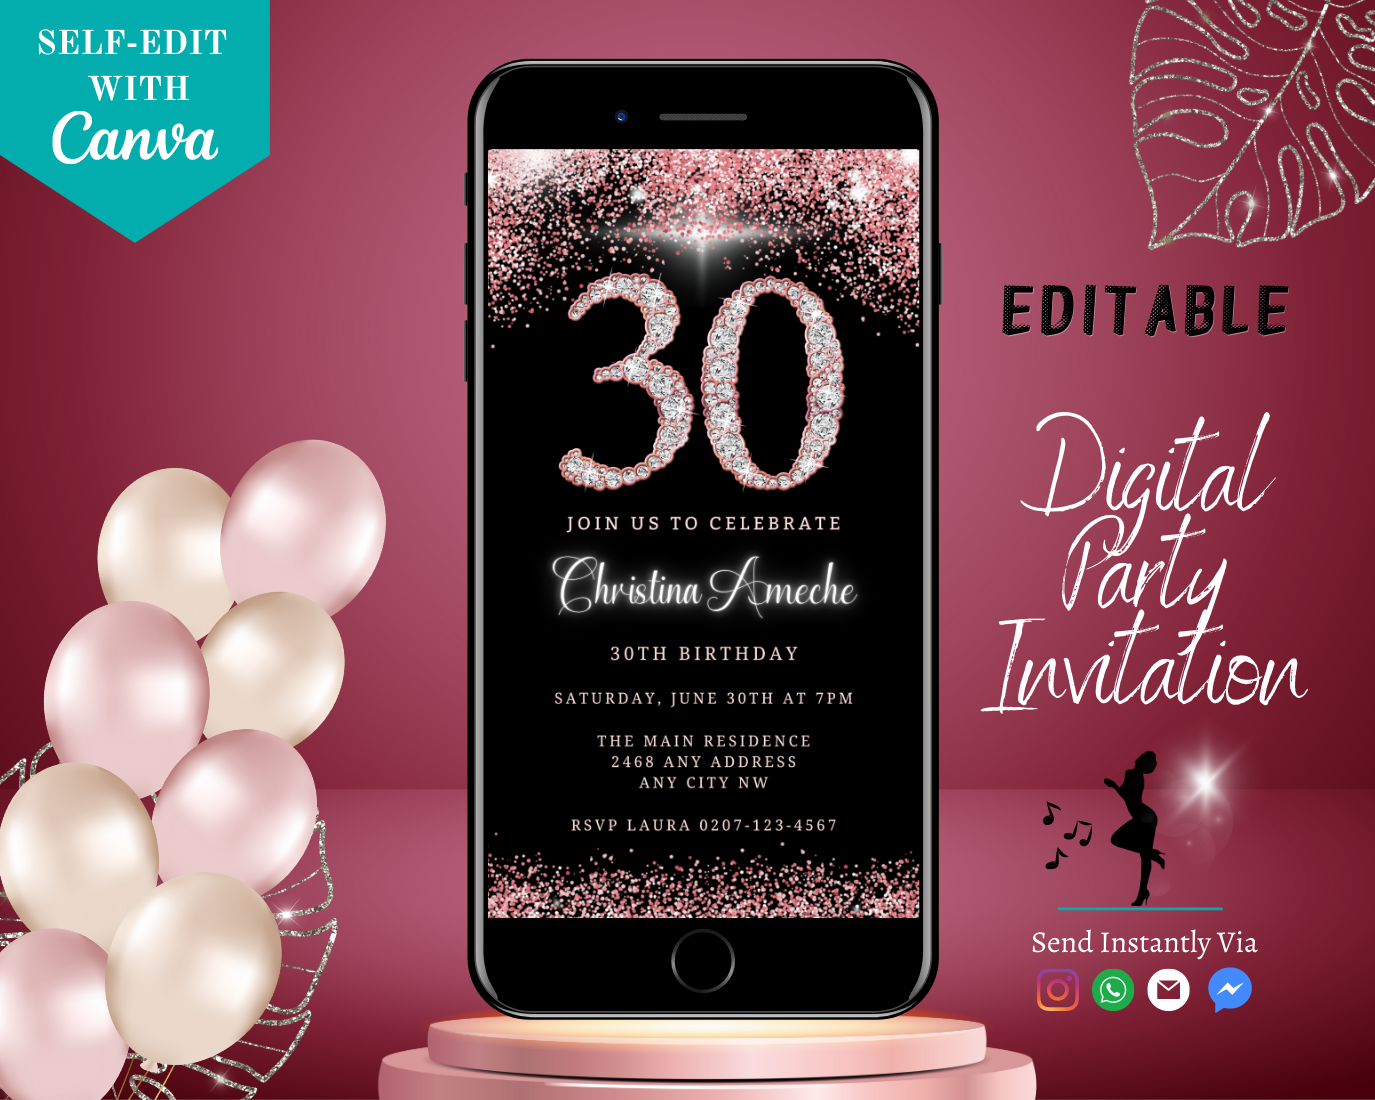 Rose Gold Glitter Diamond 30th Birthday Evite displayed on a smartphone with a pink background and balloons.